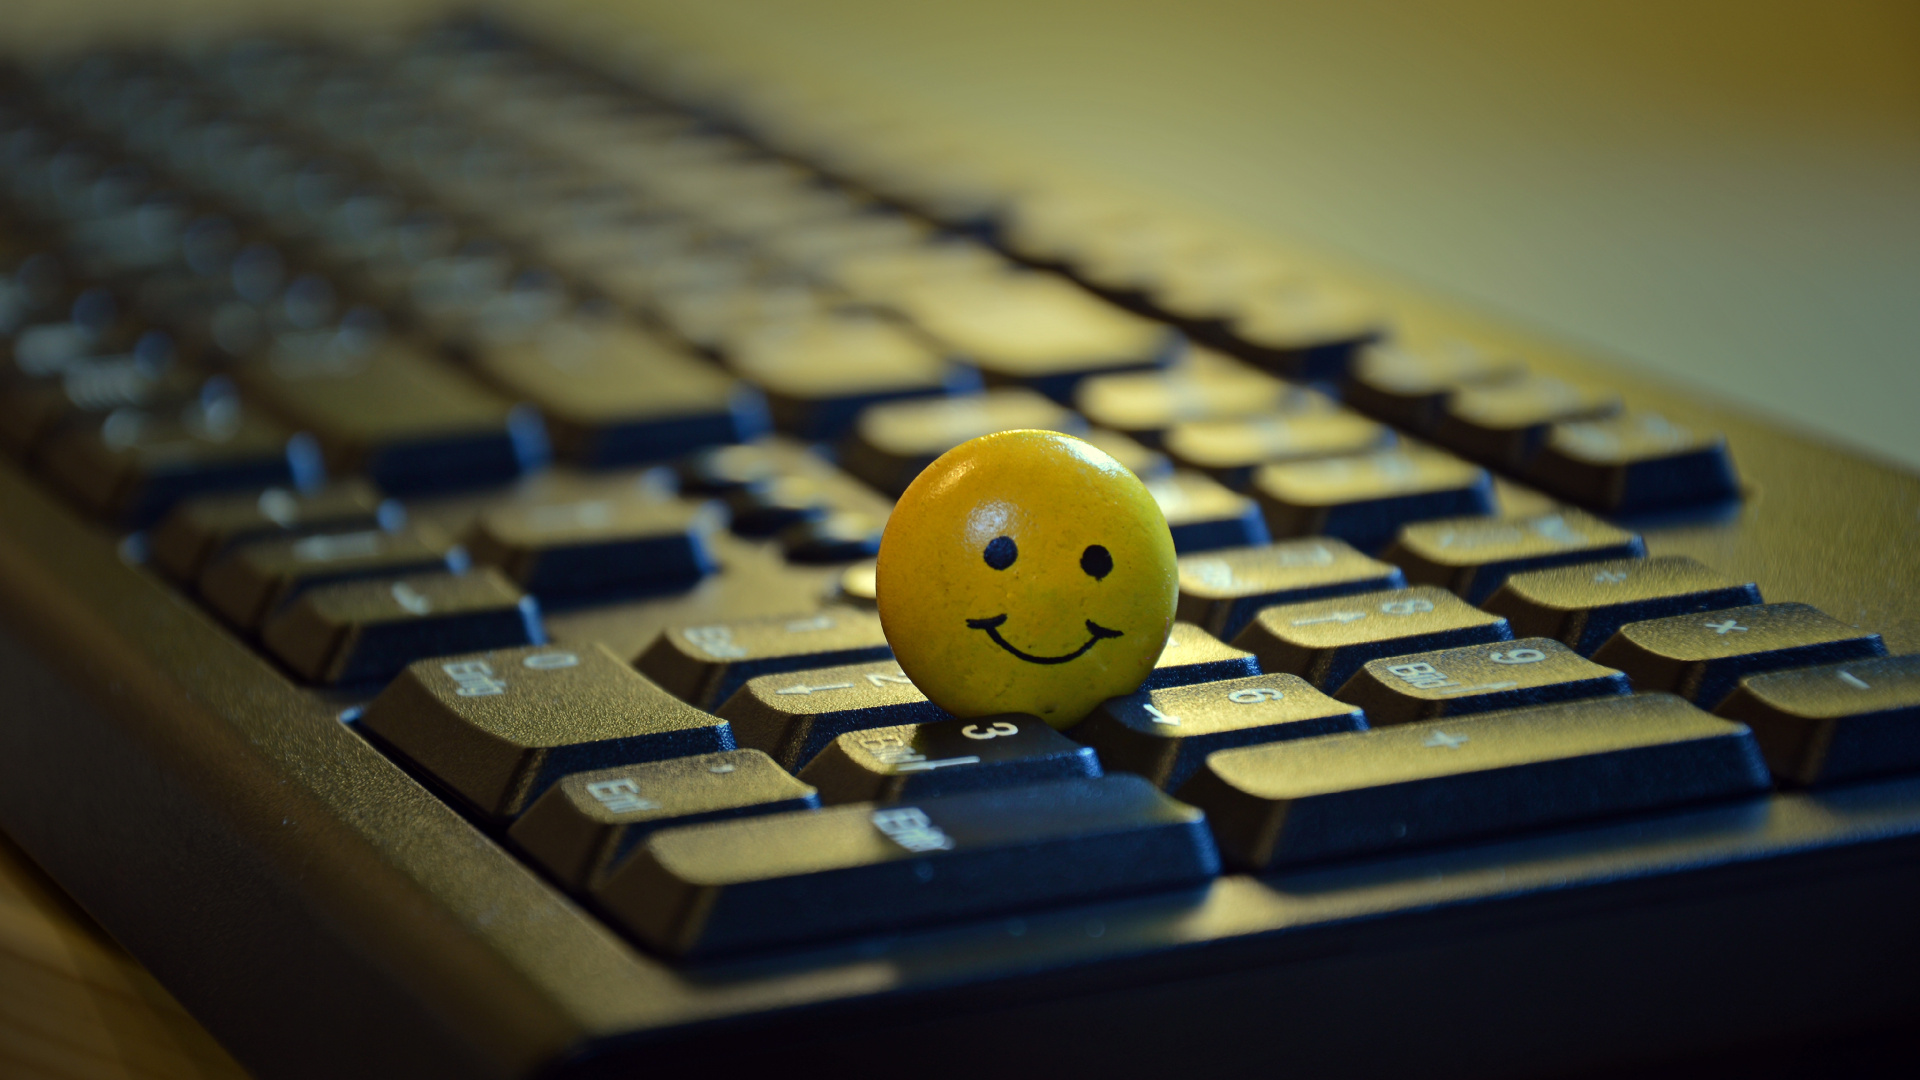 Yellow Smiley Ball on Black Computer Keyboard. Wallpaper in 1920x1080 Resolution